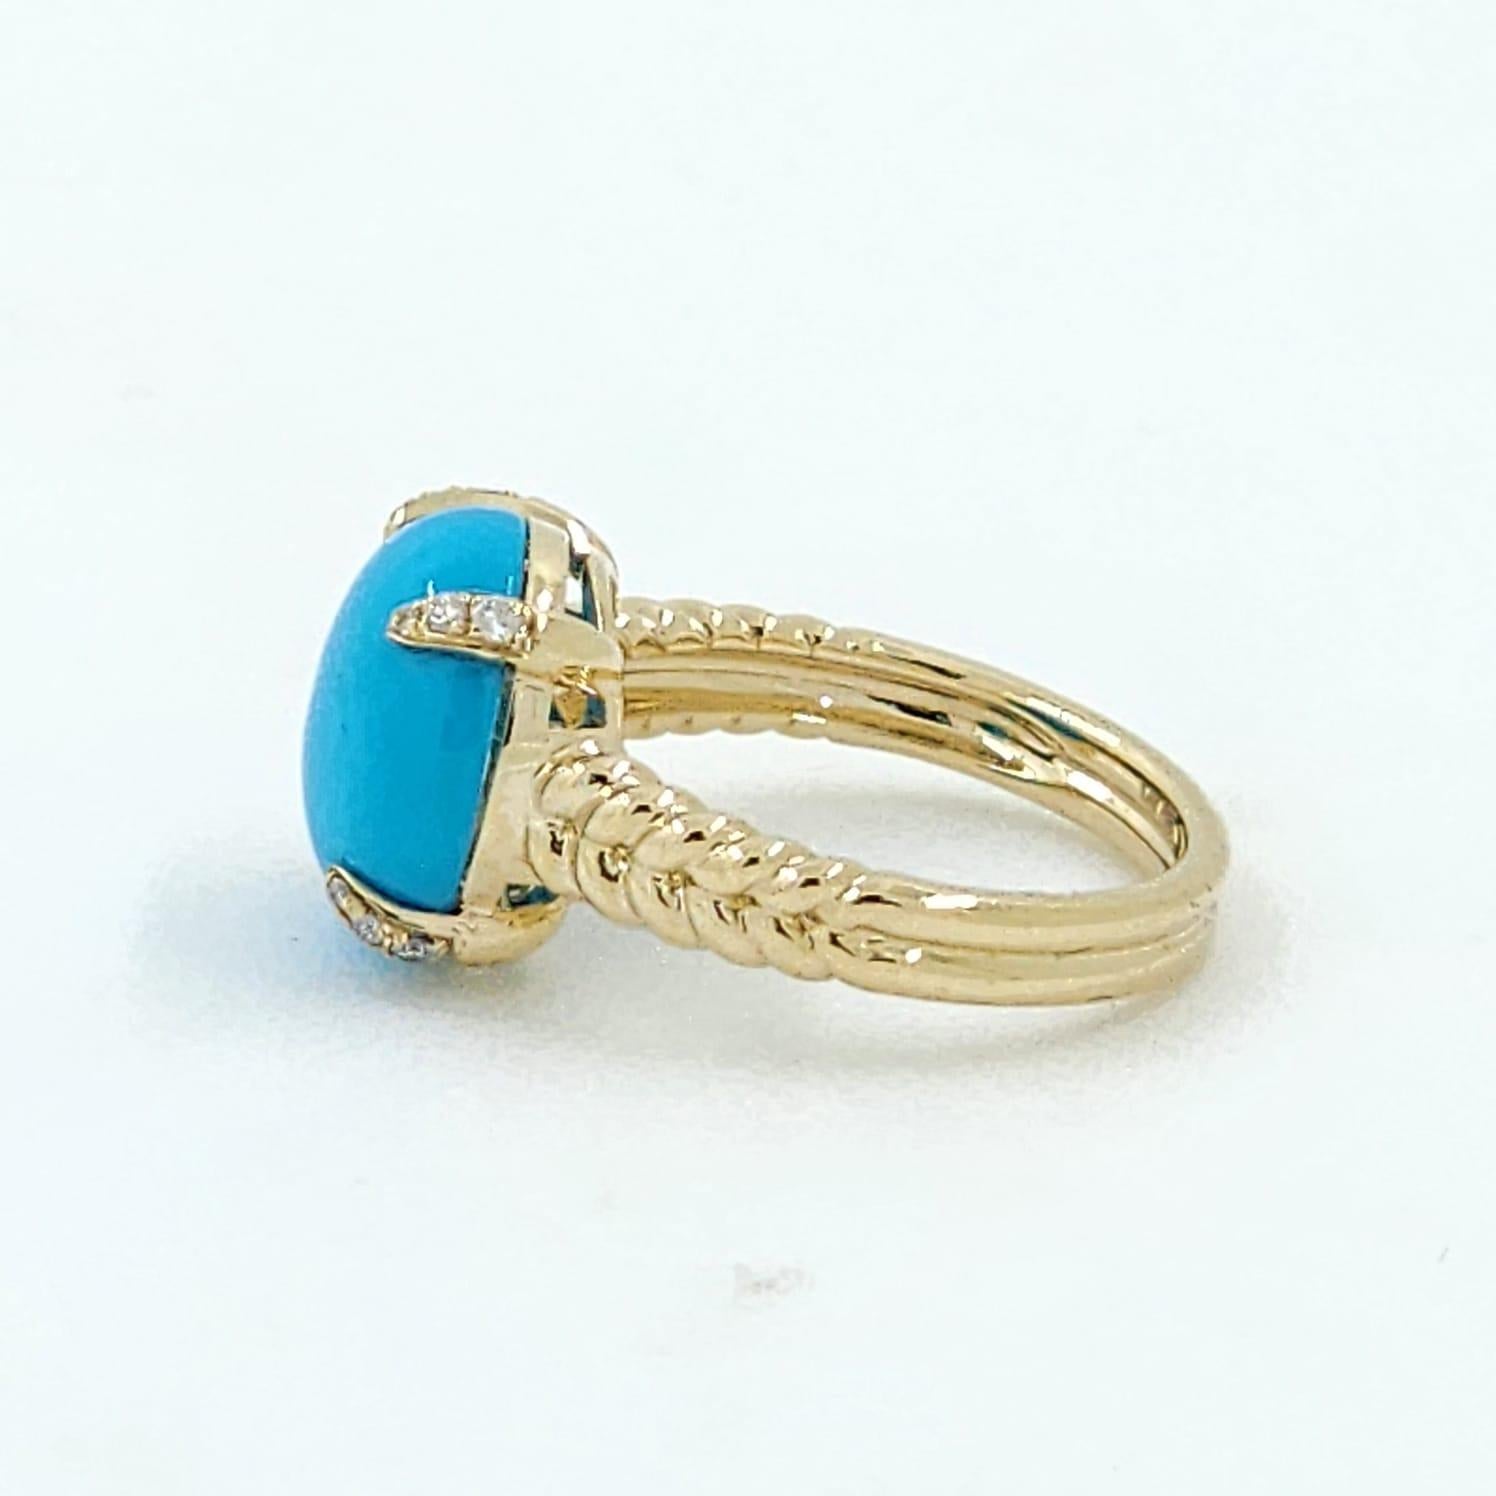 Cabochon Sleeping Beauty Turquoise Ring in 18K Yellow Gold In New Condition For Sale In Hong Kong, HK